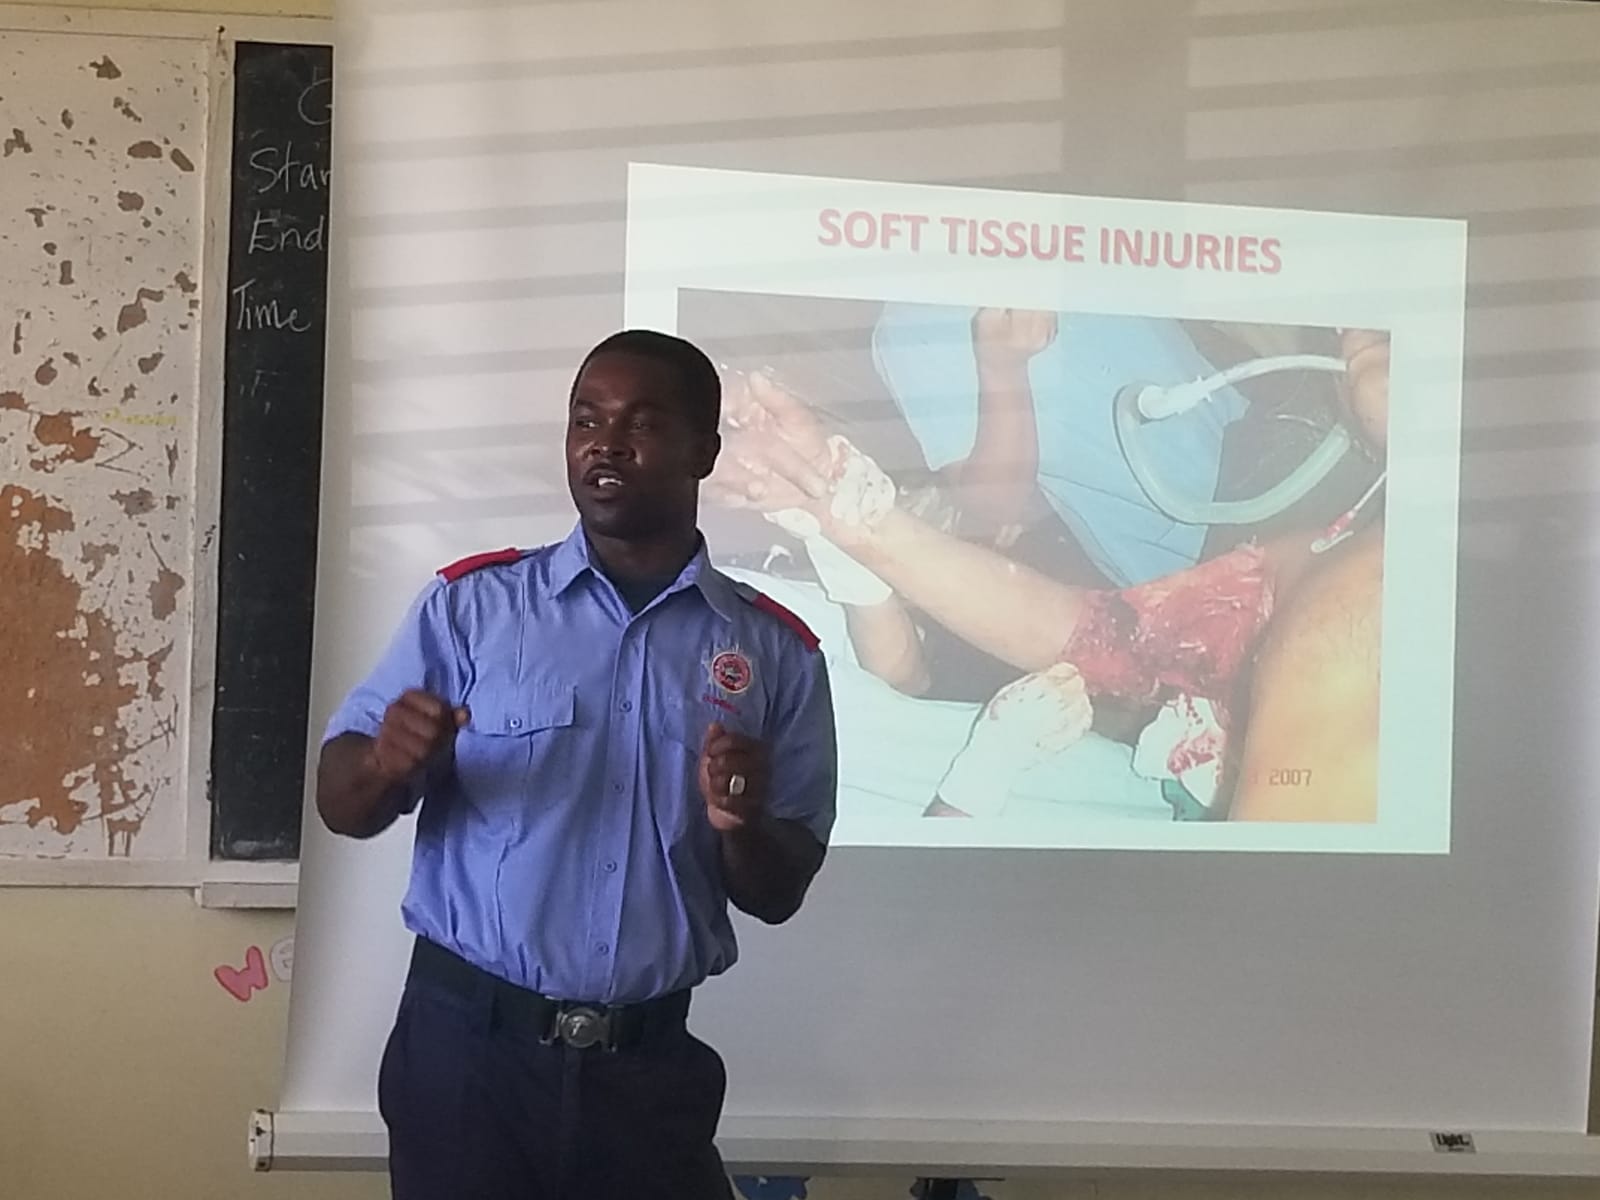 Fourth Formers Across Dominica Engaged In First Aid Training Session